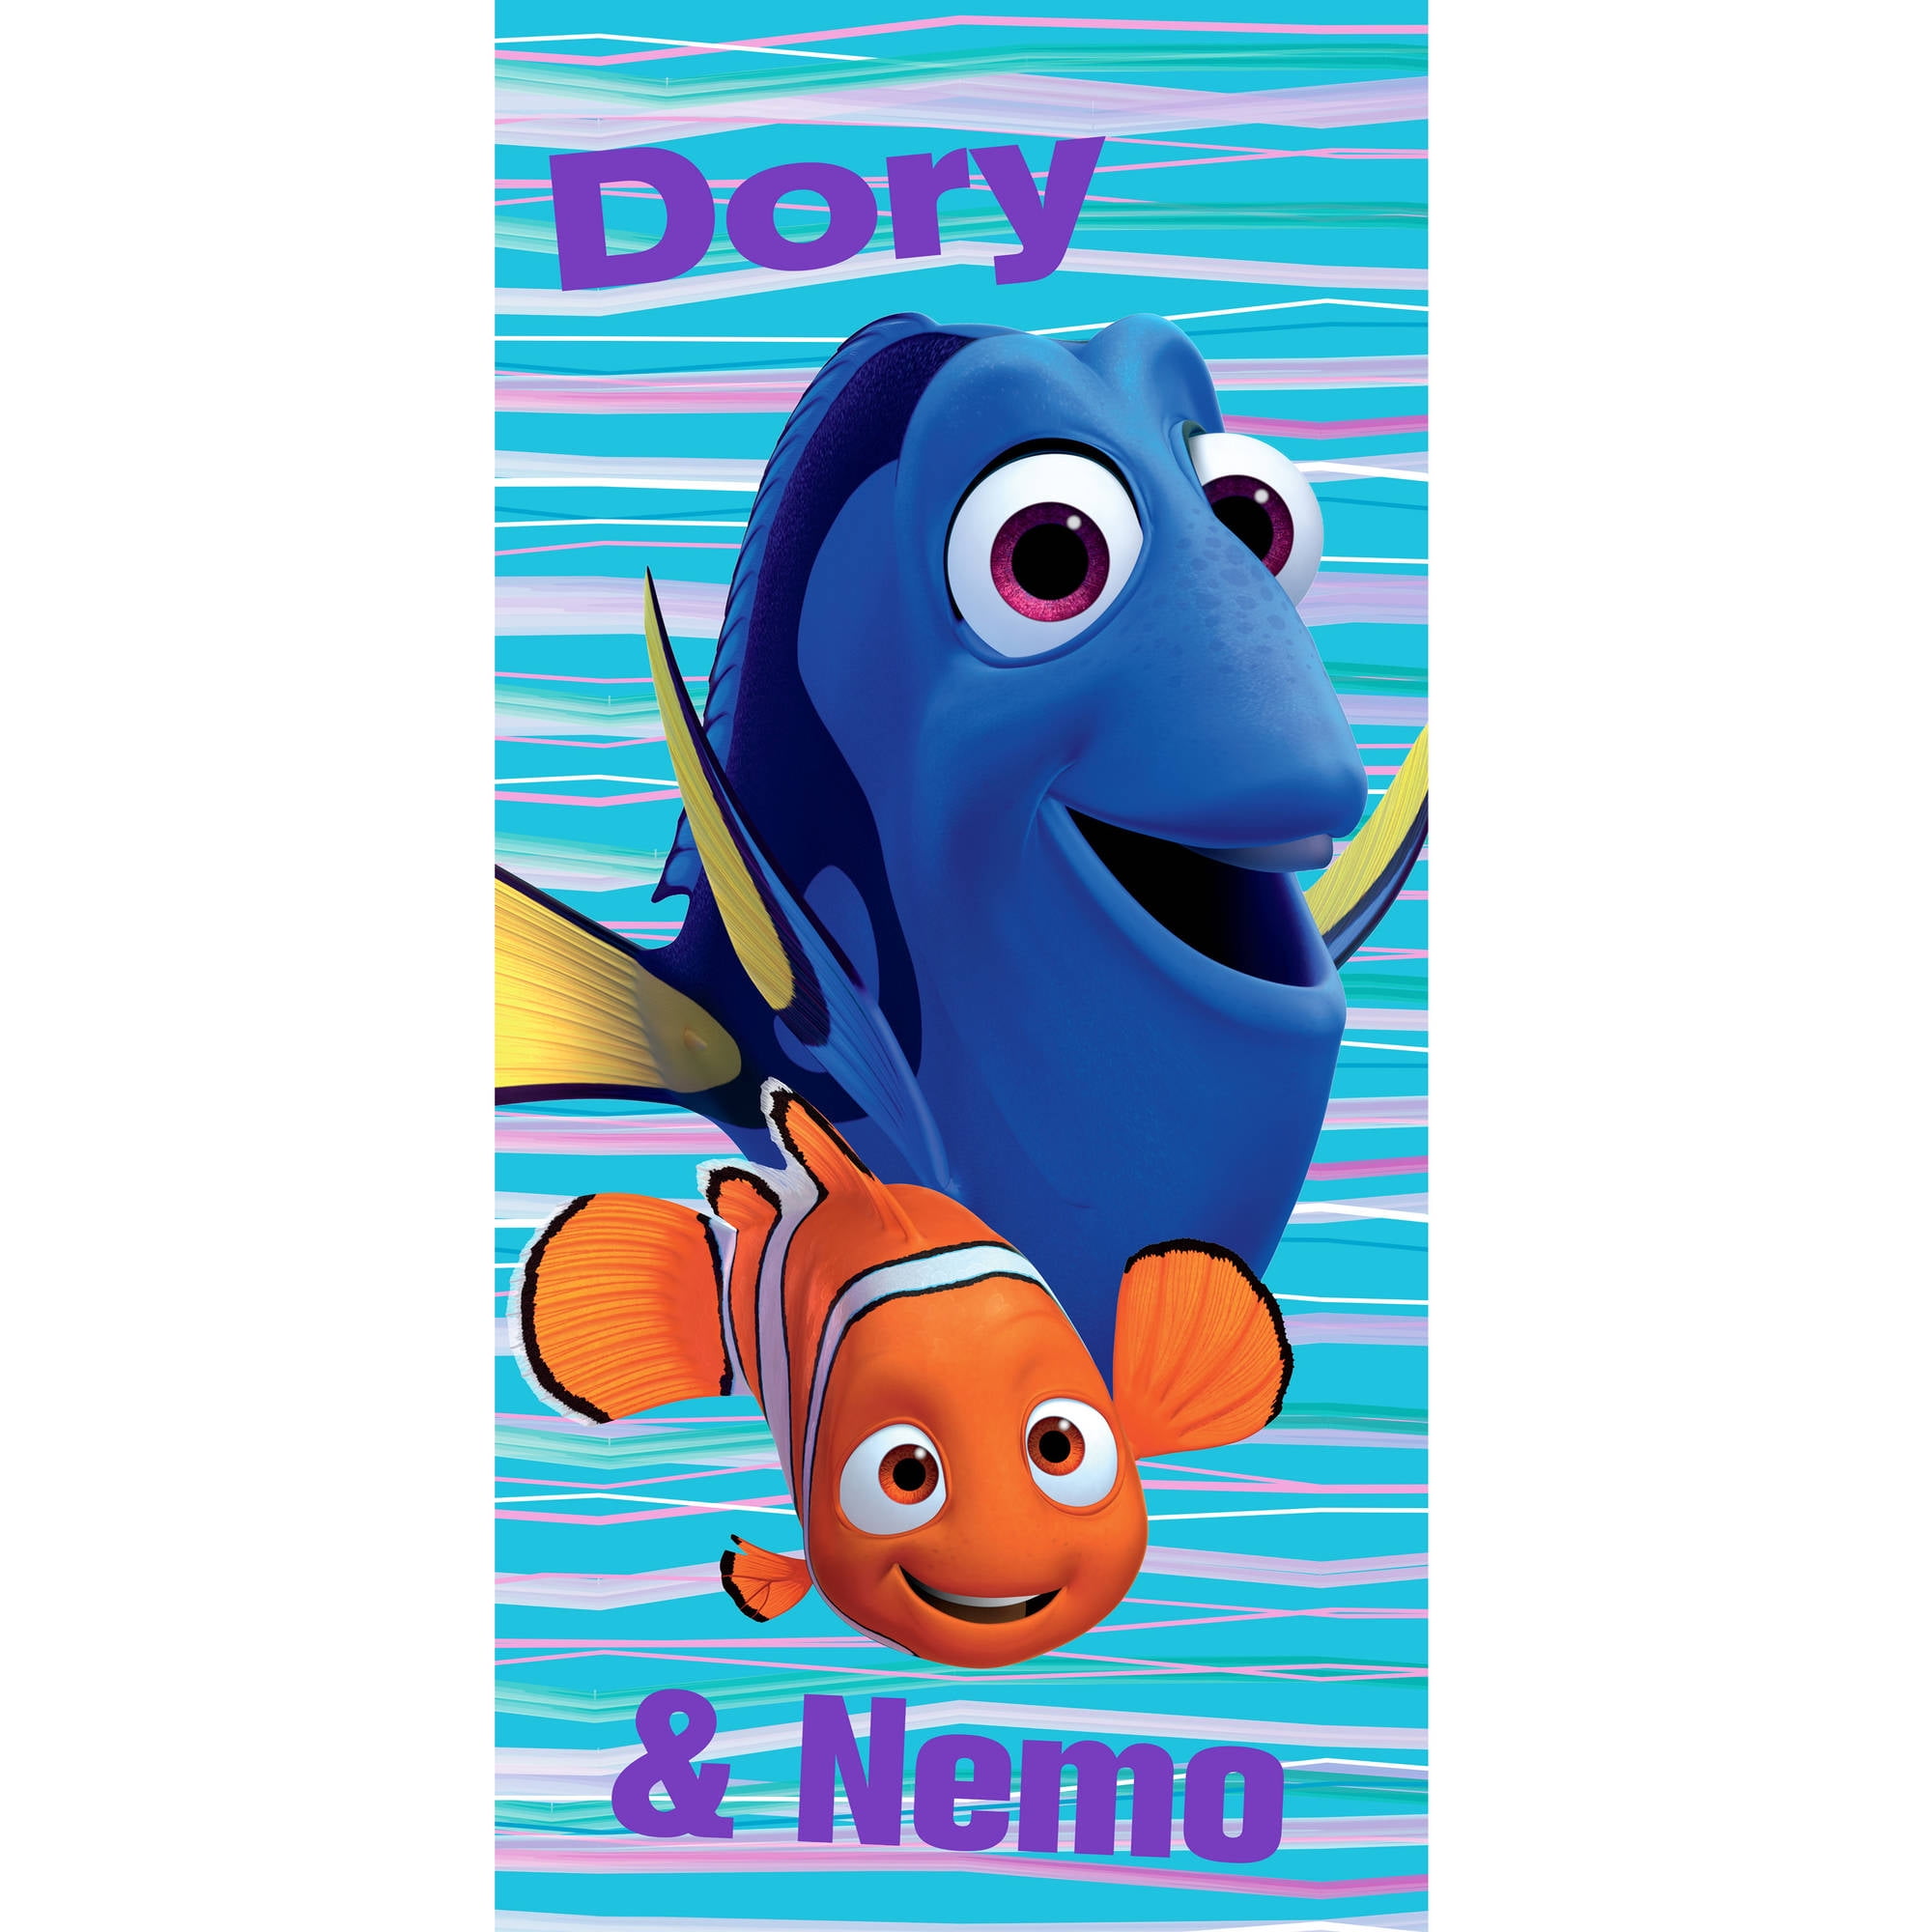 Official Disney Finding Nemo Cotton Beach Towel New Gift Dory 